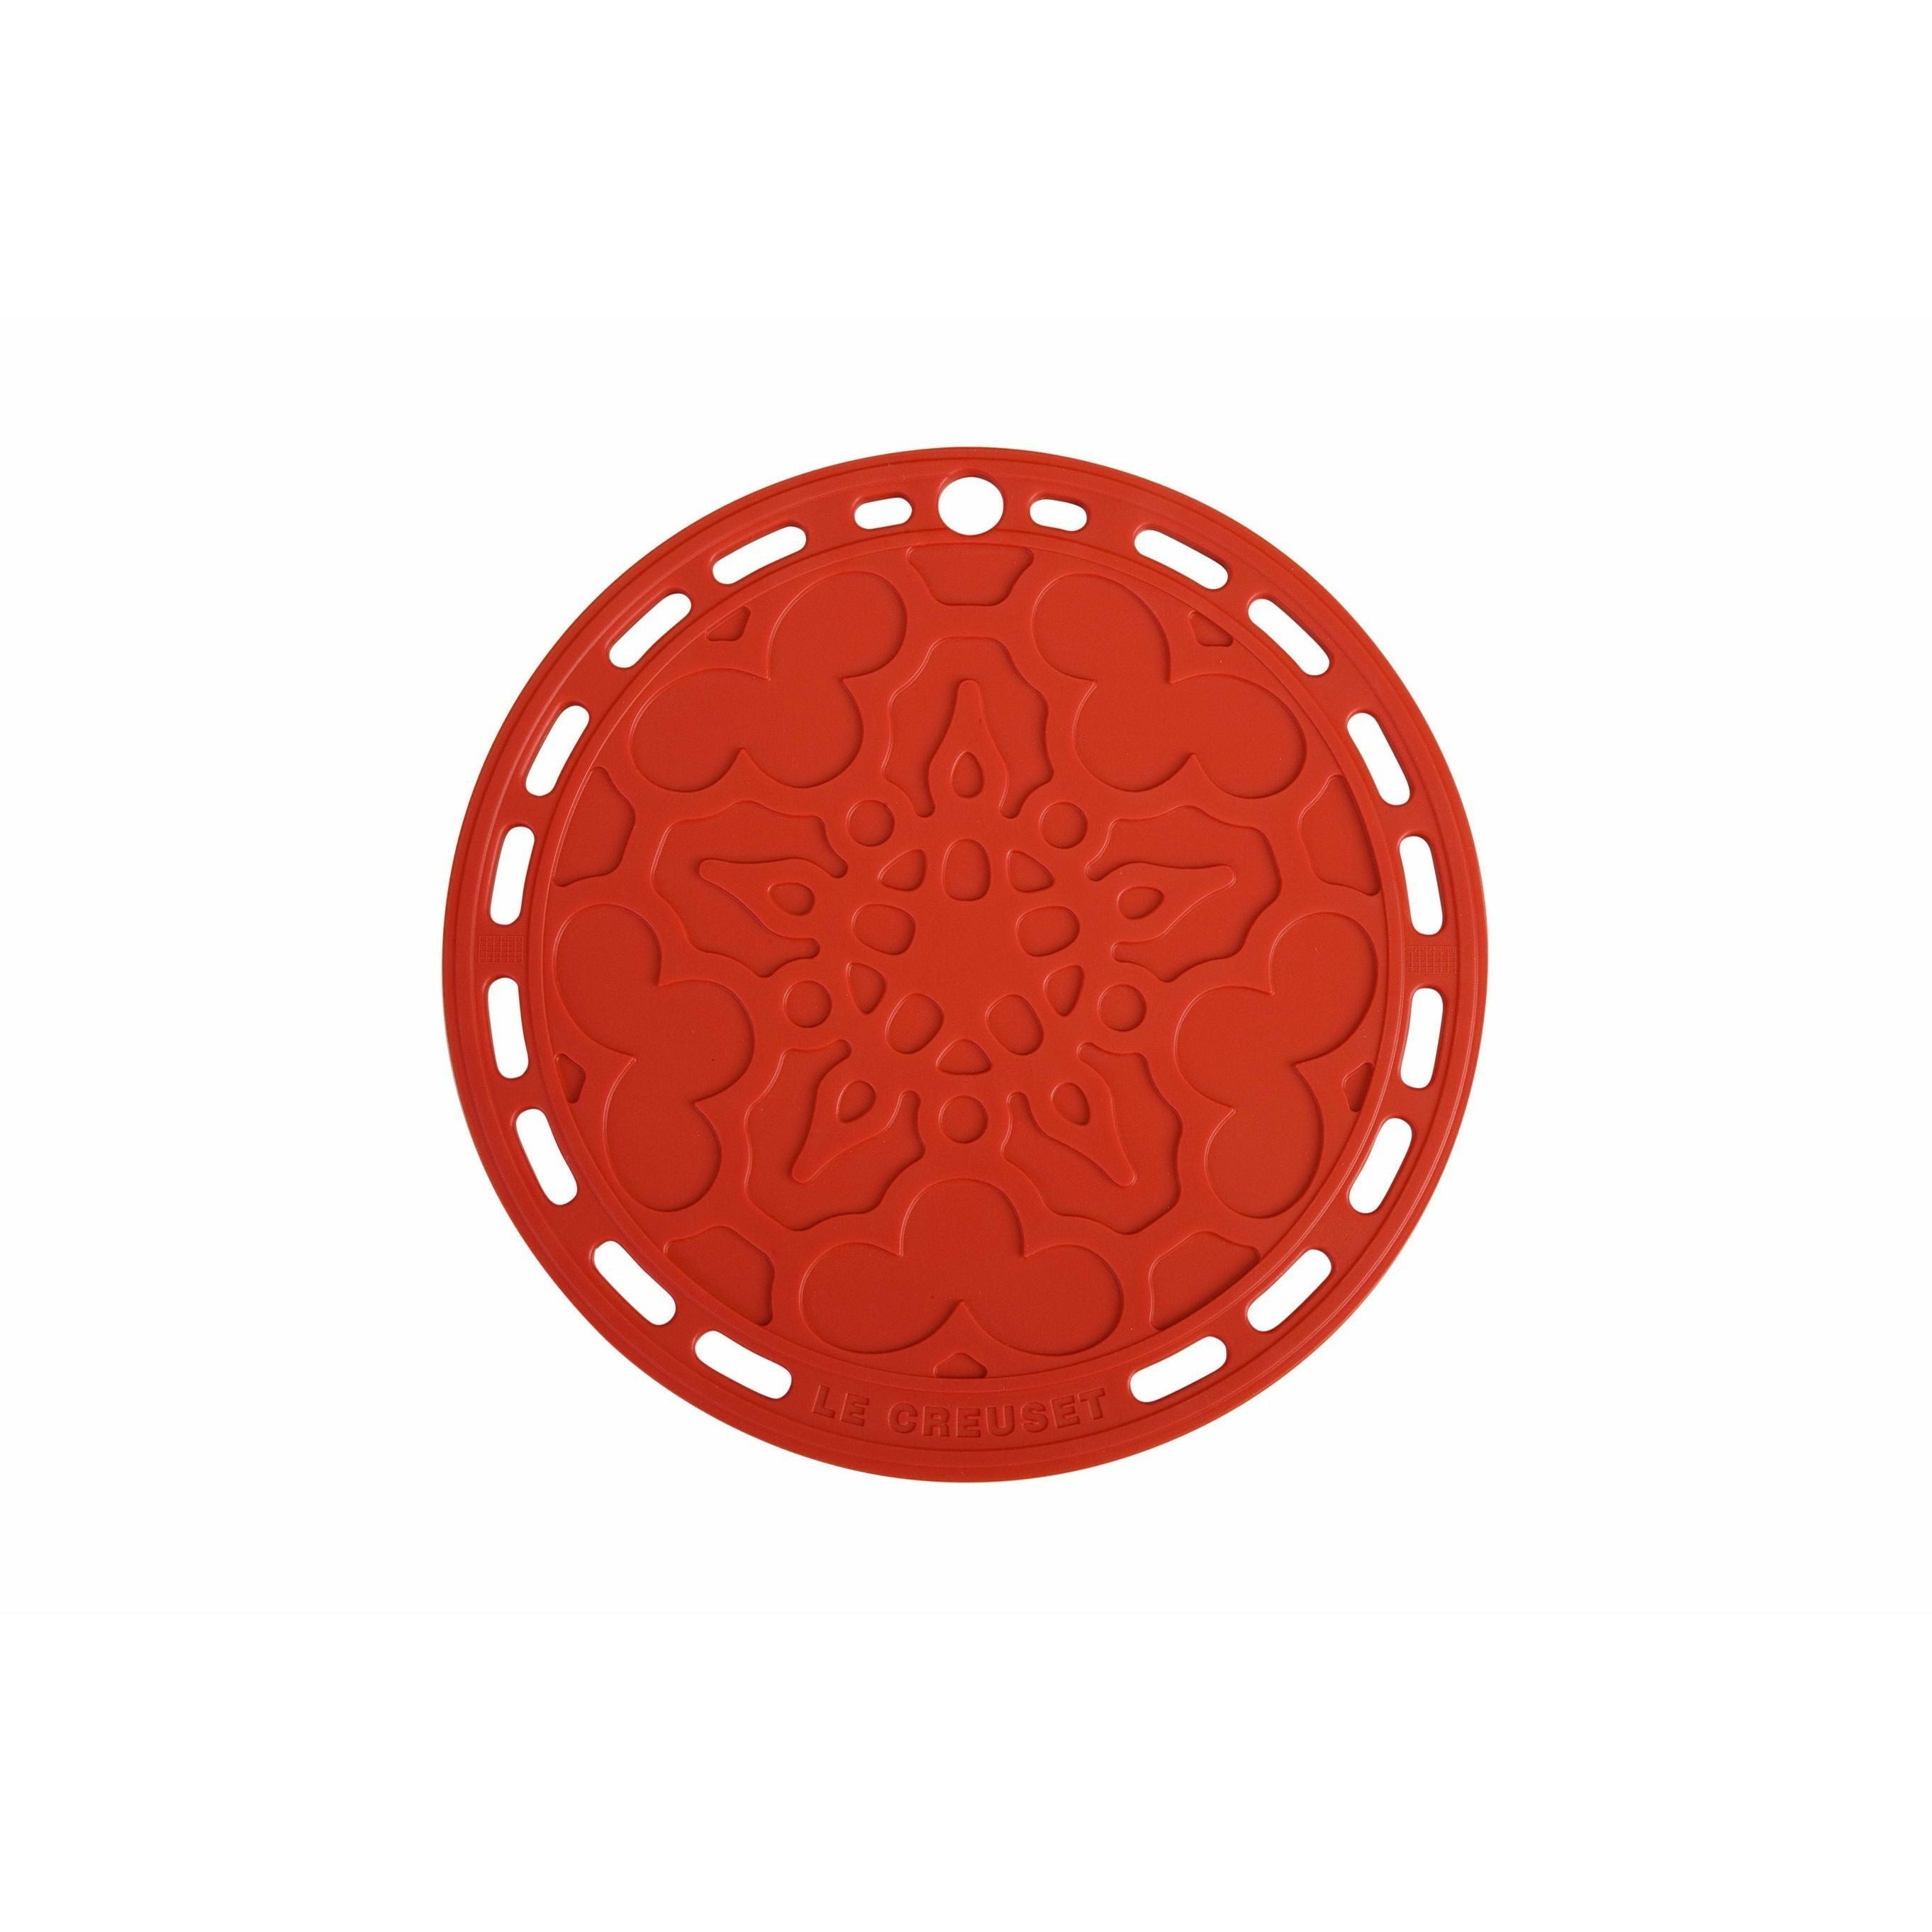 Le Creuset Silicone Coaster Tradition, Cherry Red